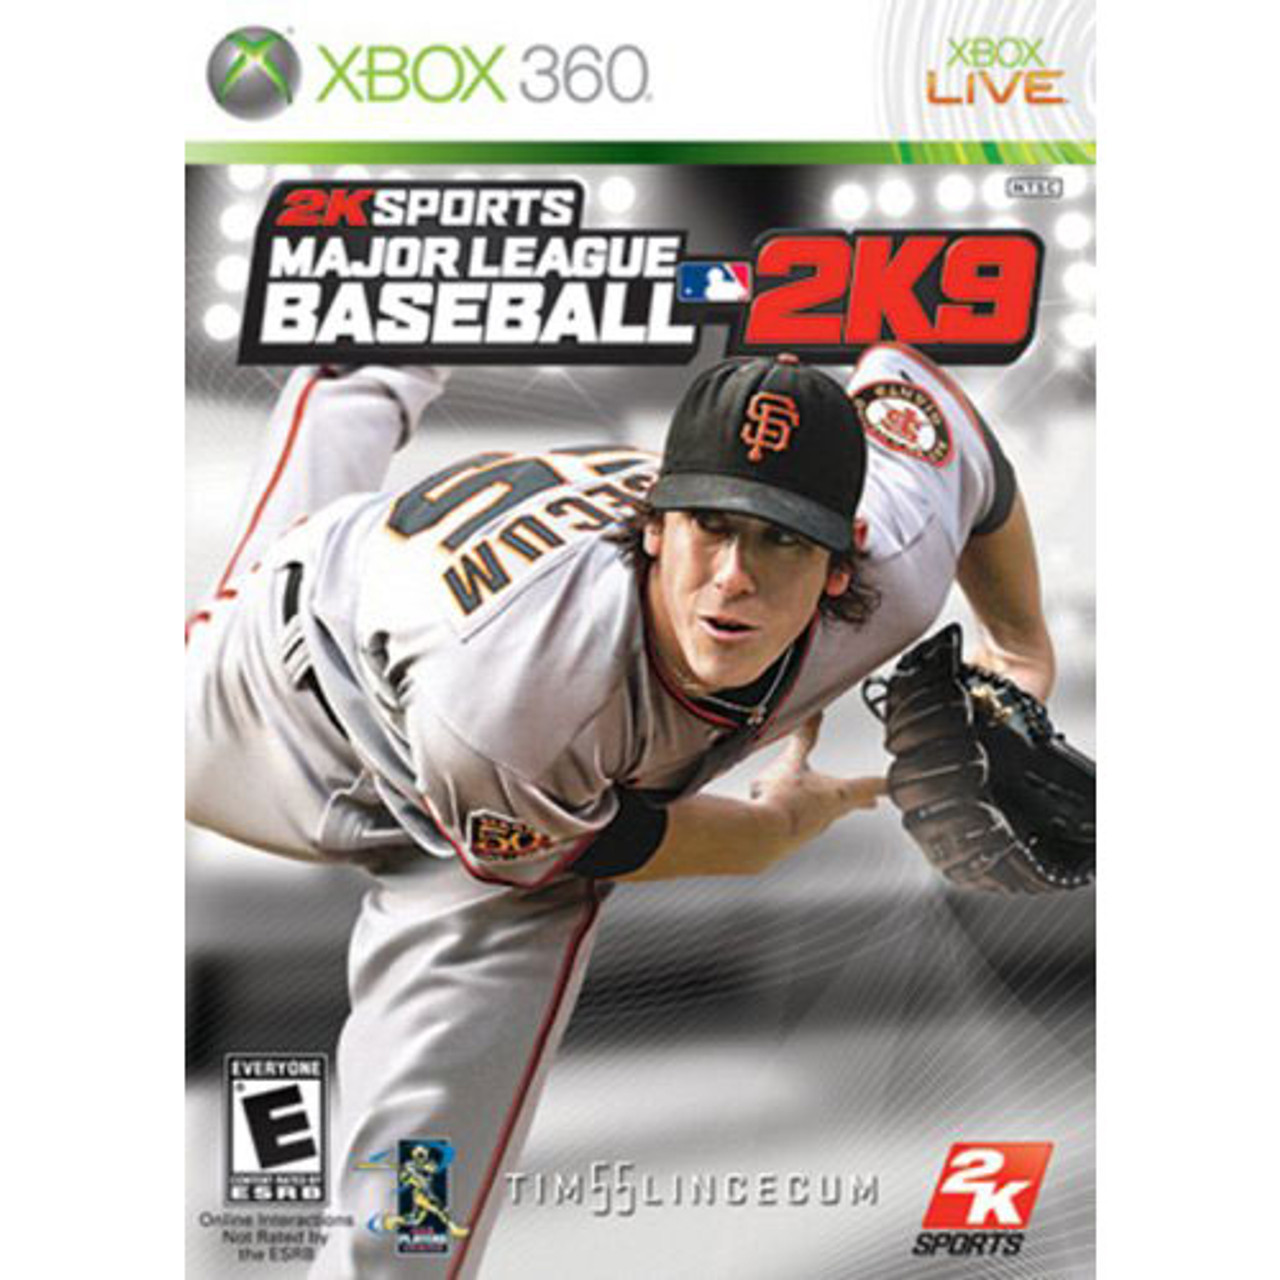 MLB 2K9 Xbox 360 game For Sale DKOldies